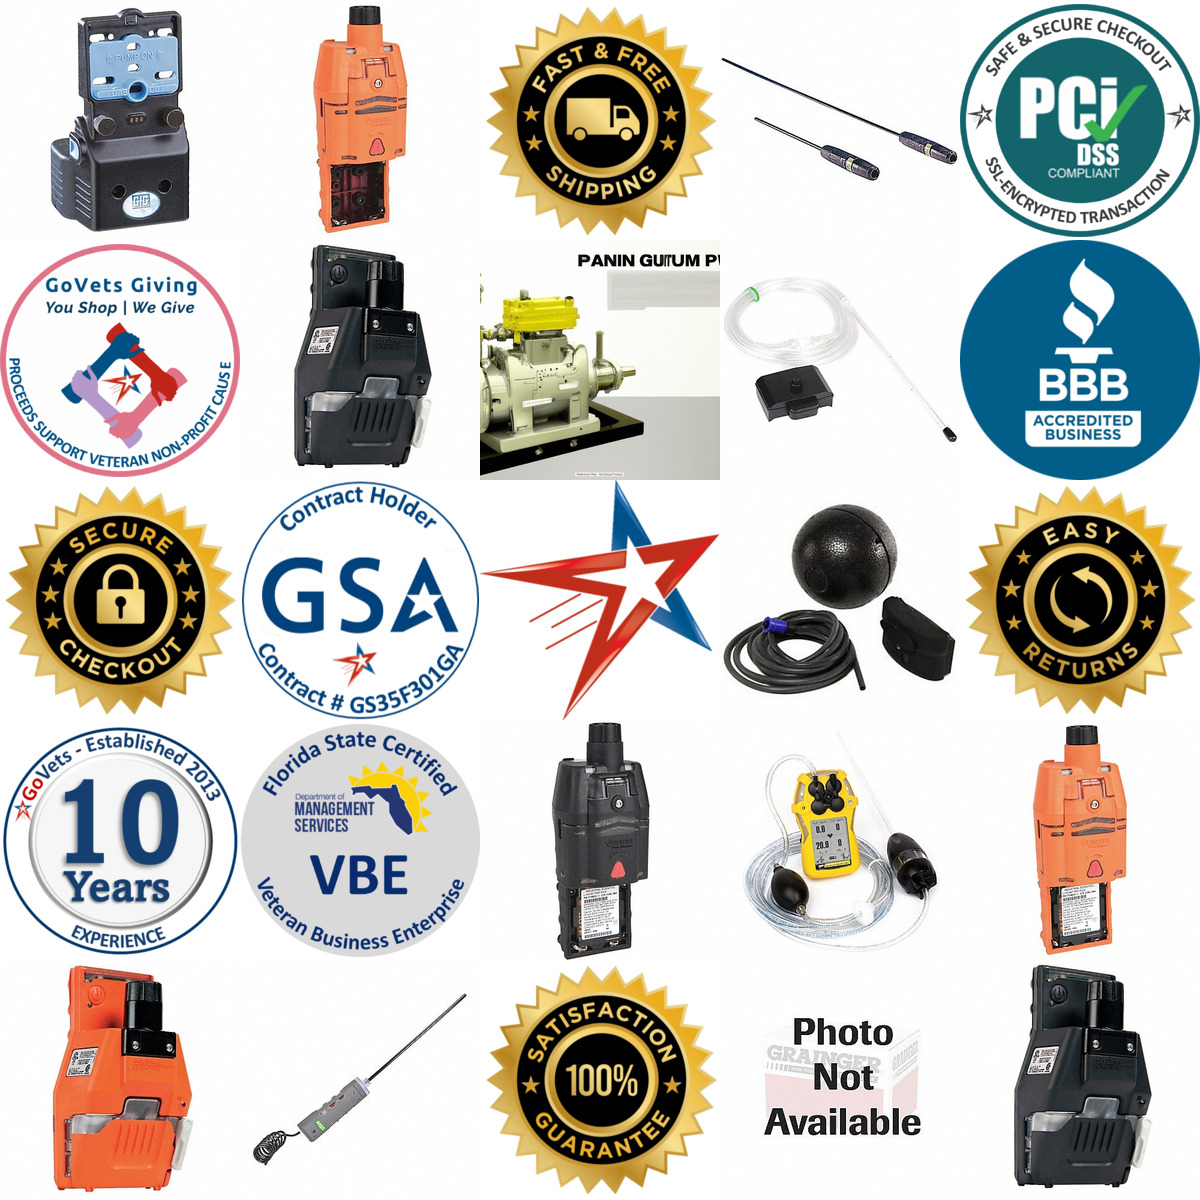 A selection of Sample Draw Pumps products on GoVets